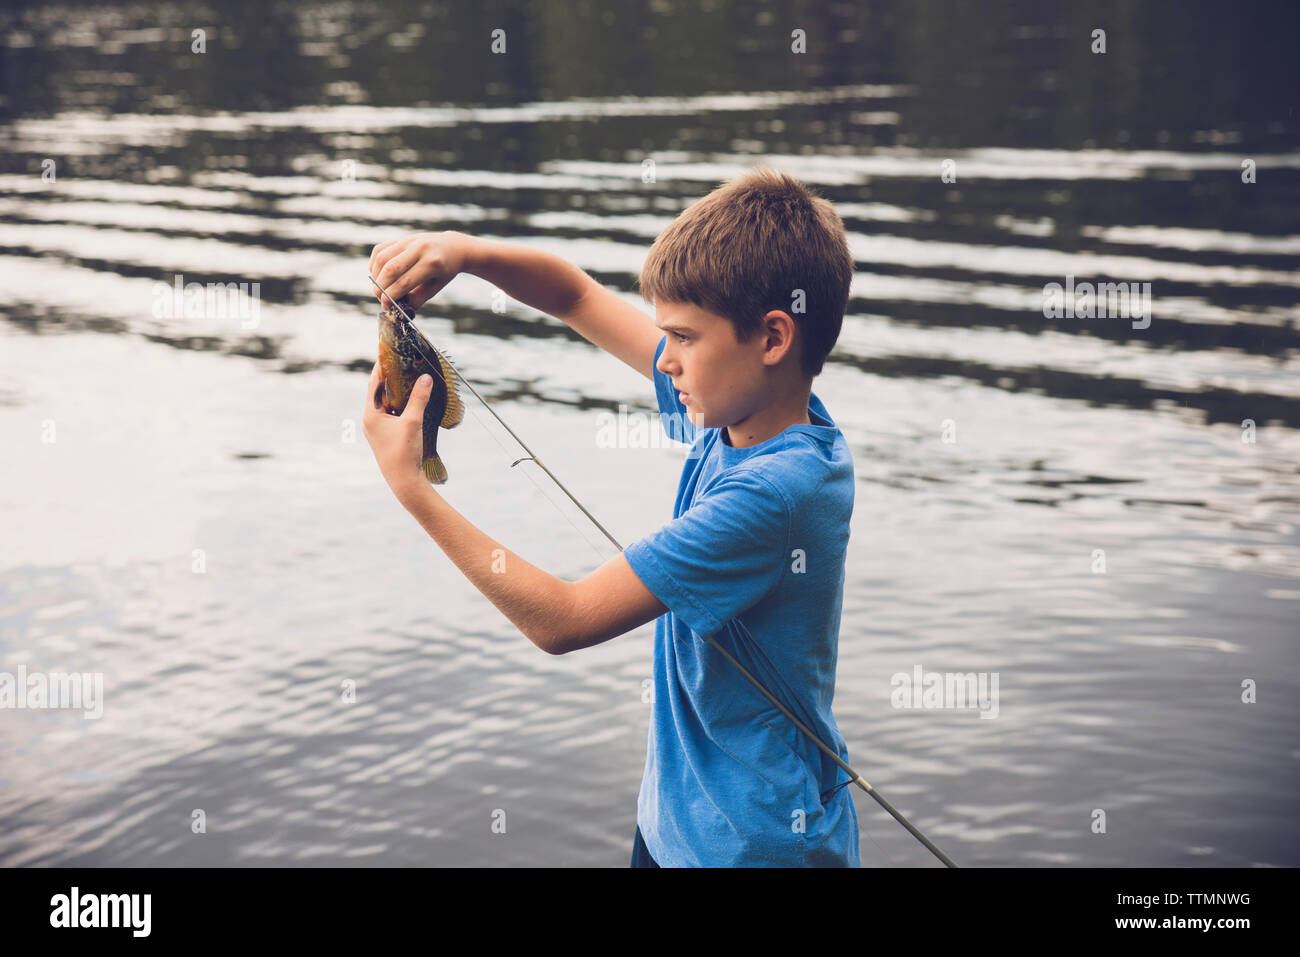 Side view of boy removing fish from fishing rod at lake Stock Photo